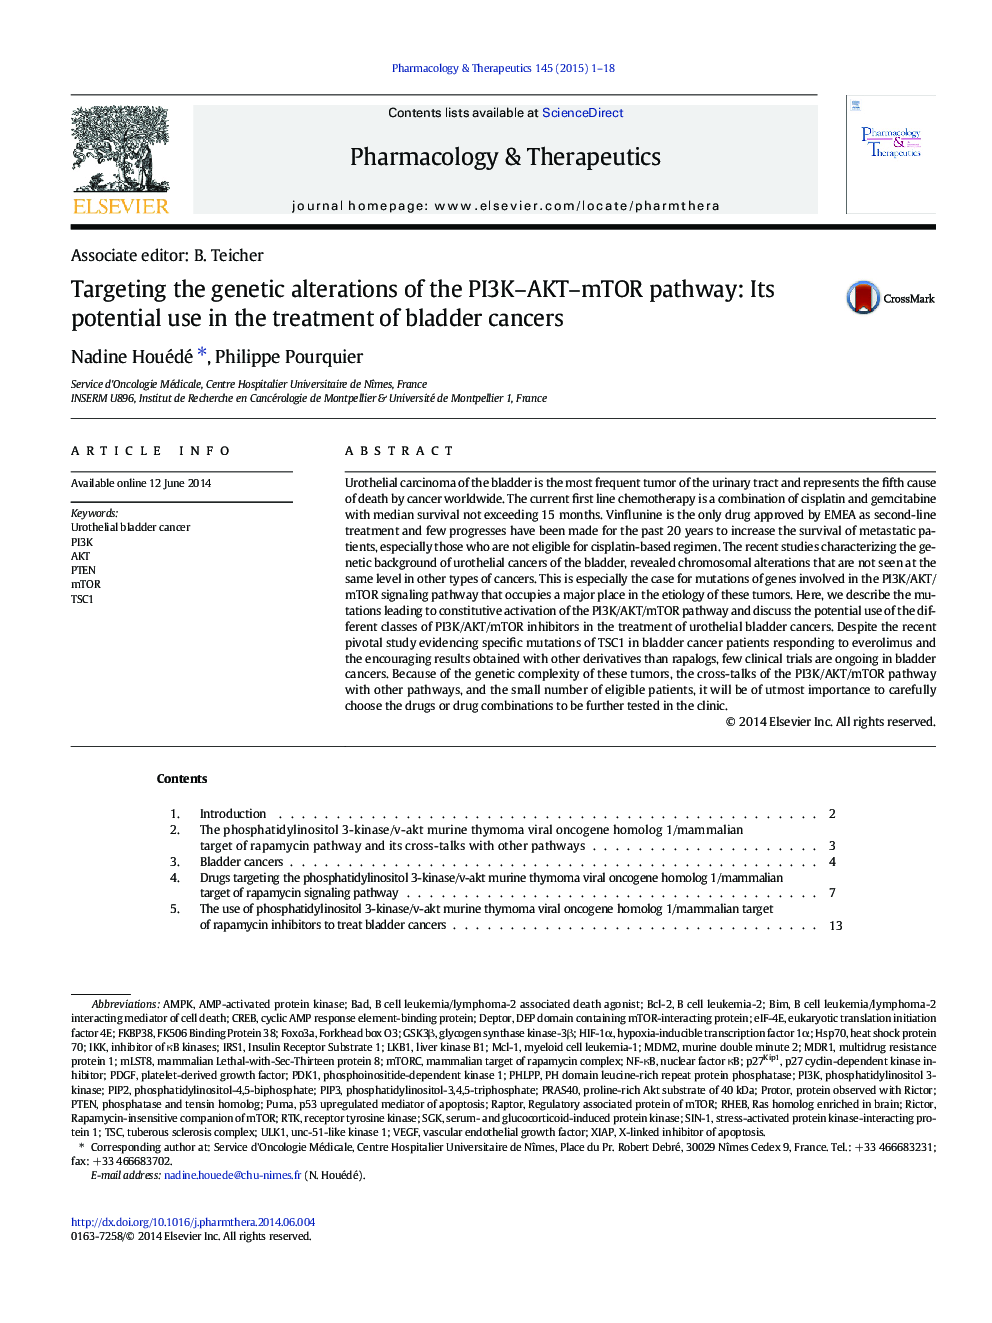 Associate editor: B. TeicherTargeting the genetic alterations of the PI3K-AKT-mTOR pathway: Its potential use in the treatment of bladder cancers